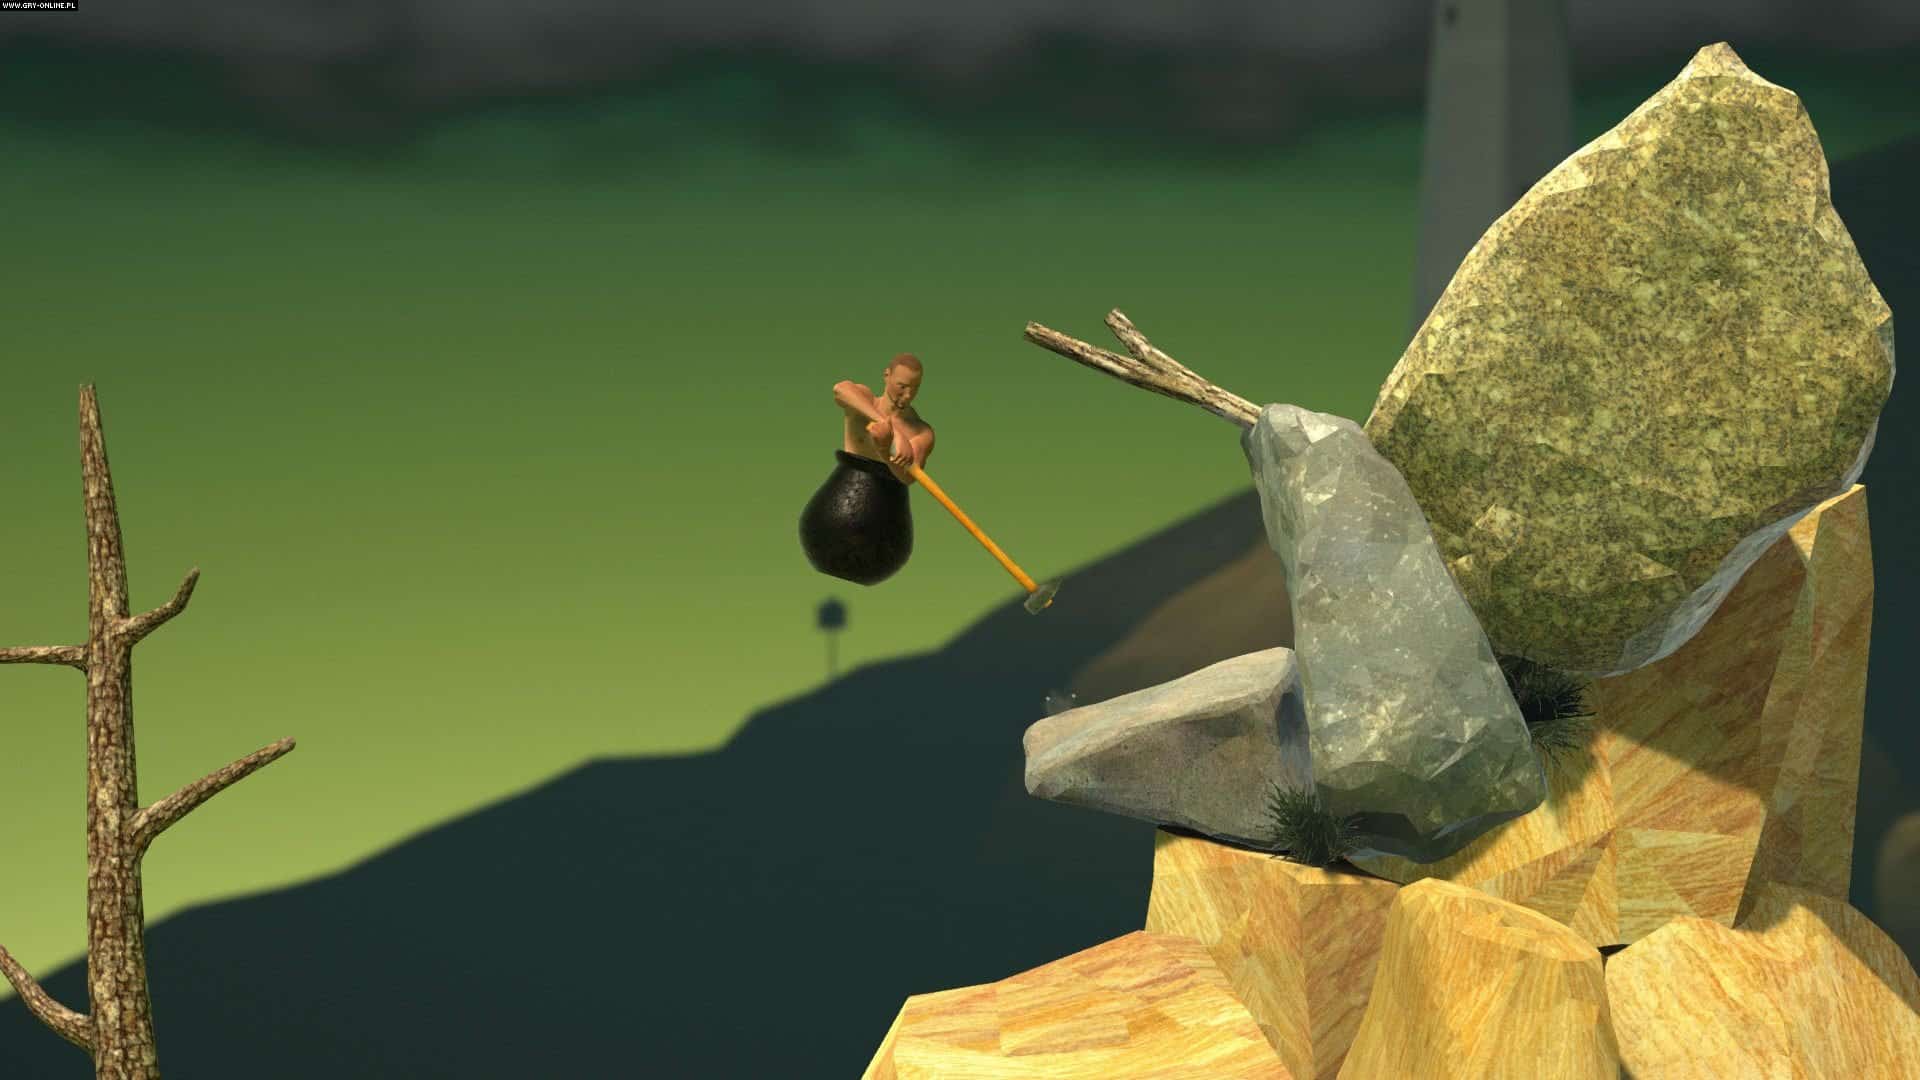 Getting Over It with Bennett Foddy Screenshots-4